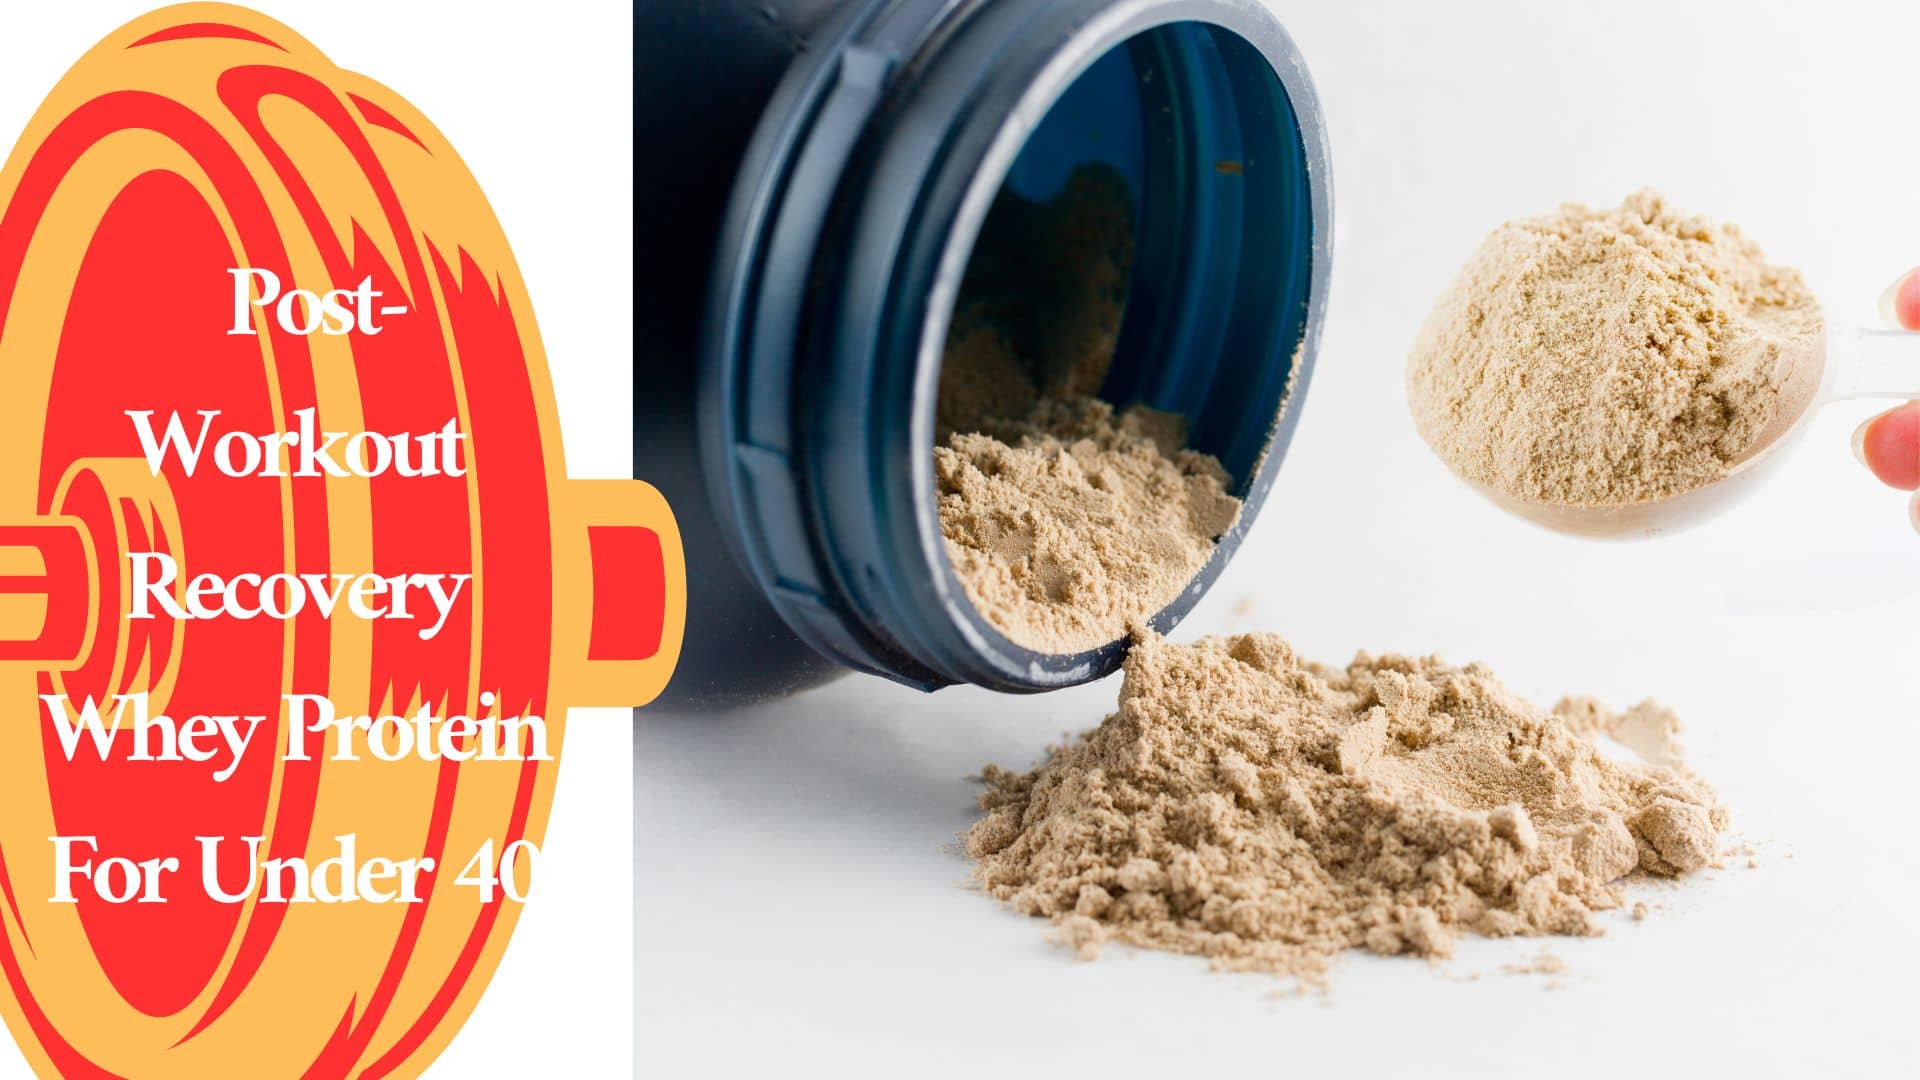 Post-Workout Recovery Whey Protein For Under 40